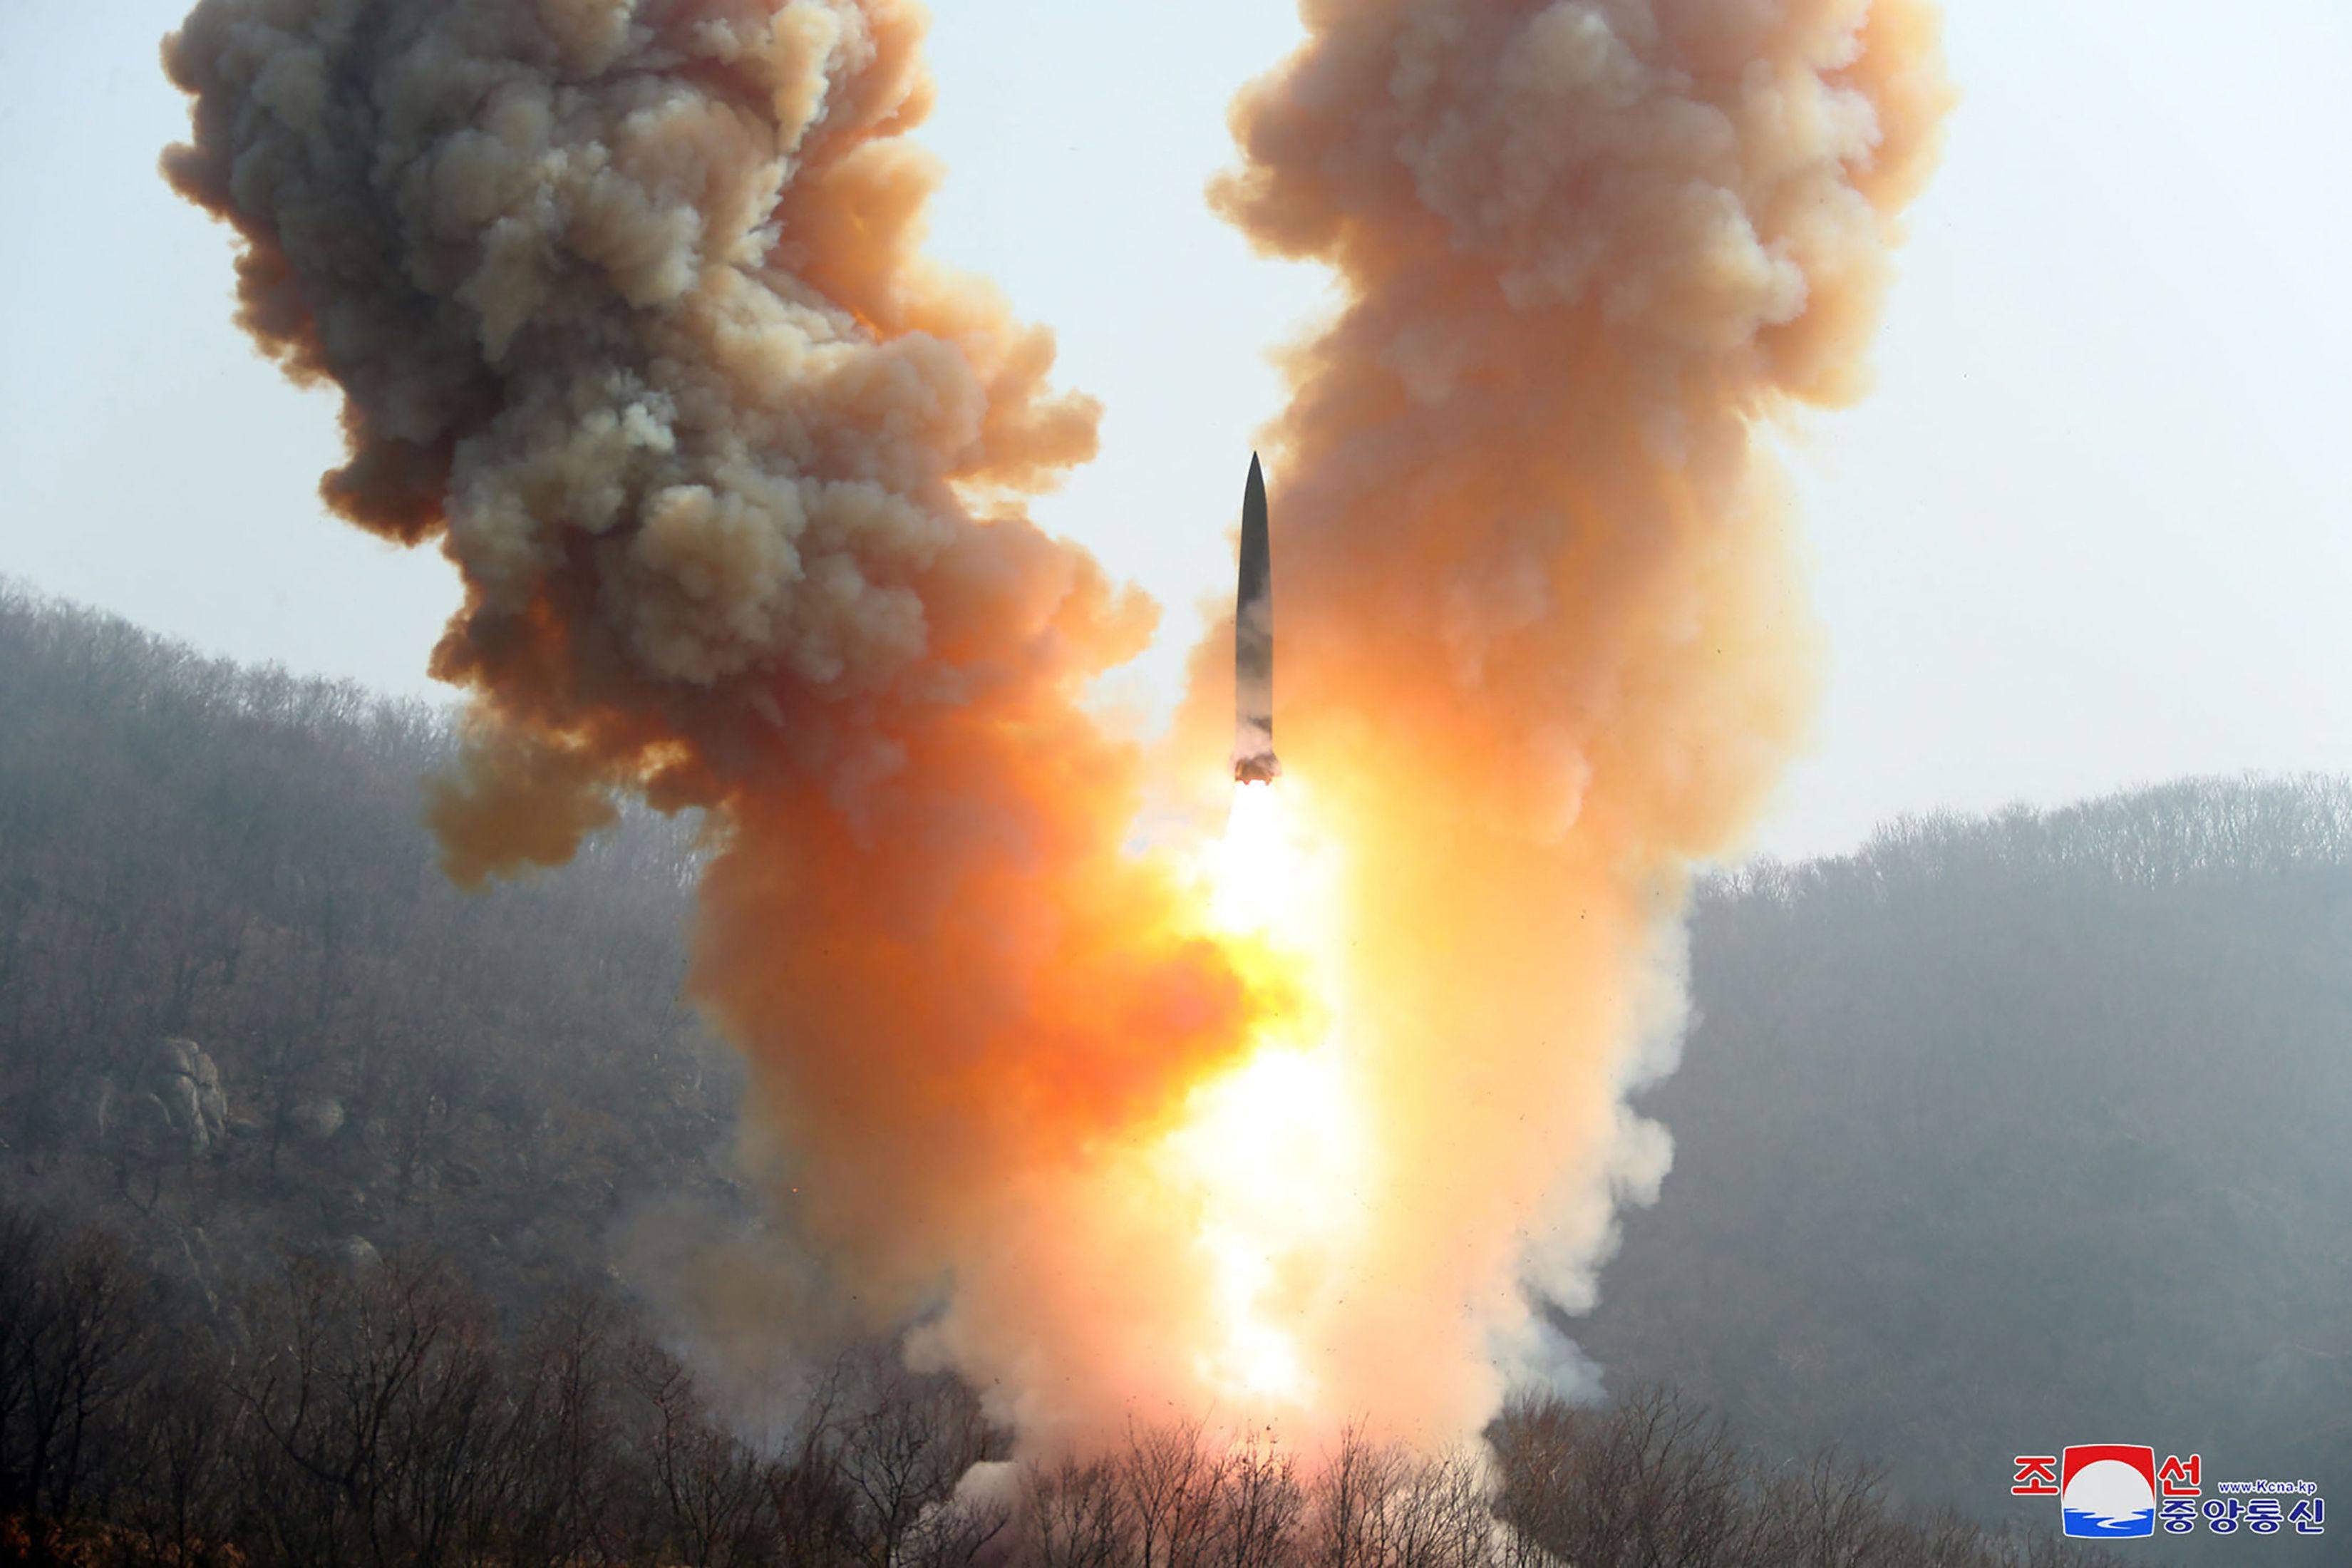 North Korea fires a ballistic missile carrying a mock nuclear warhead last year in what state media described as military drills “simulating a nuclear counterattack”. Photo: KCNA via KNS/AFP